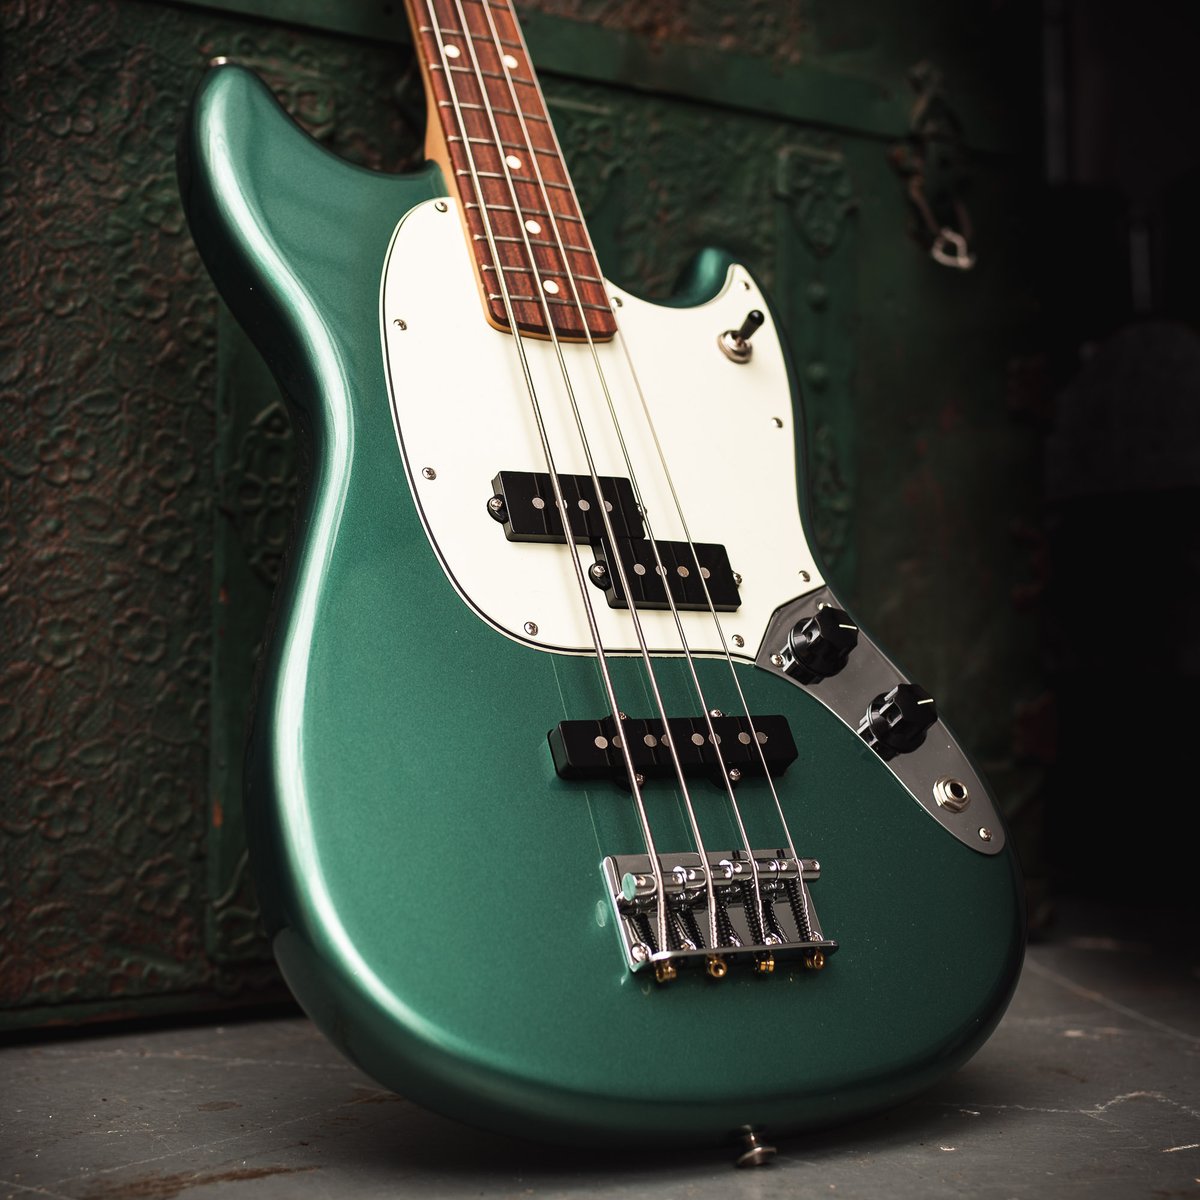 Bring the outdoors in with this CME Exclusive @fender Mustang Bass PJ in Sherwood Green, a short-scale bass that’s the perfect size for staying inside. bit.ly/42f5WJ8 #chicagomusicexchange #thebassment #Fender #FenderBass #CMEexclusive #basstalk #CMElovestrades